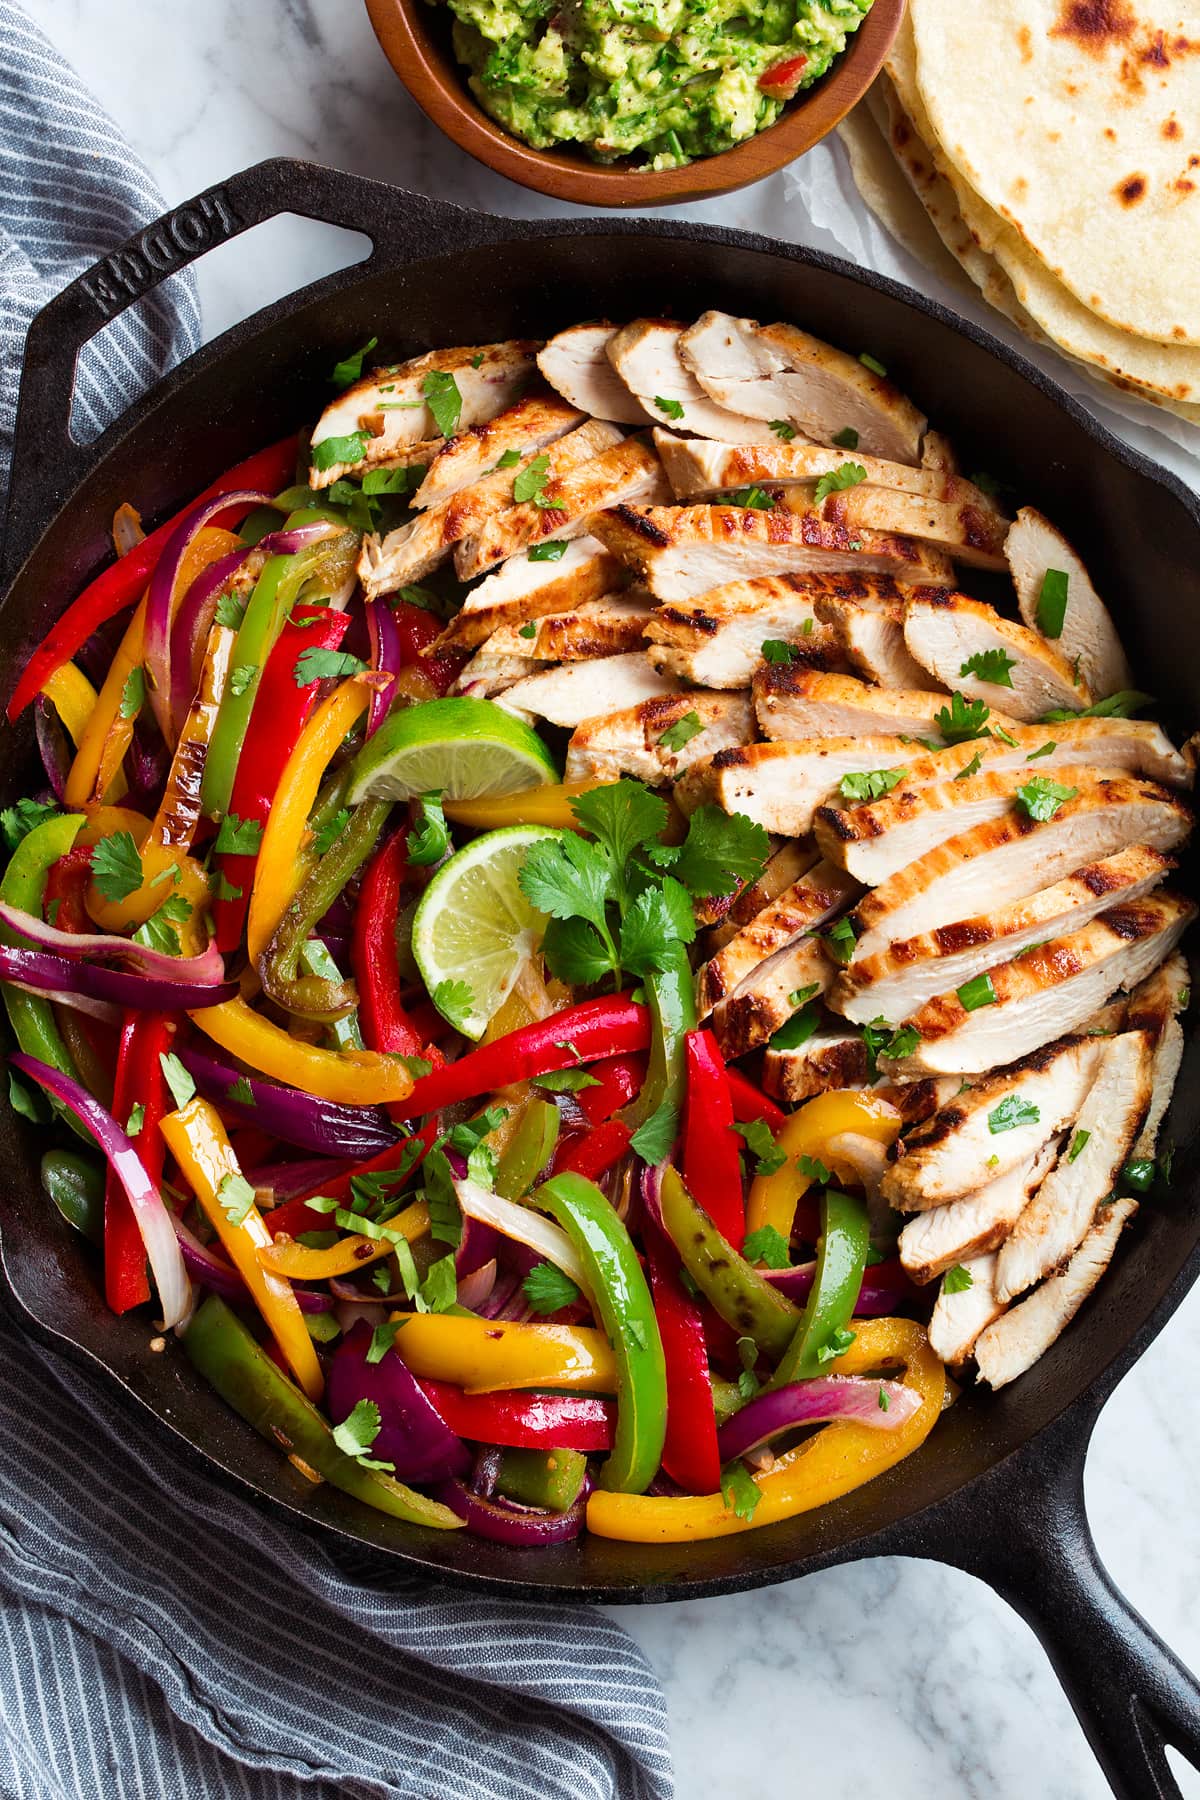 Chicken Fajitas mixture in a cast iron skillet. Showing sliced chicken breasts, bell peppers and onions. Tortillas and guacamole are served on the side.